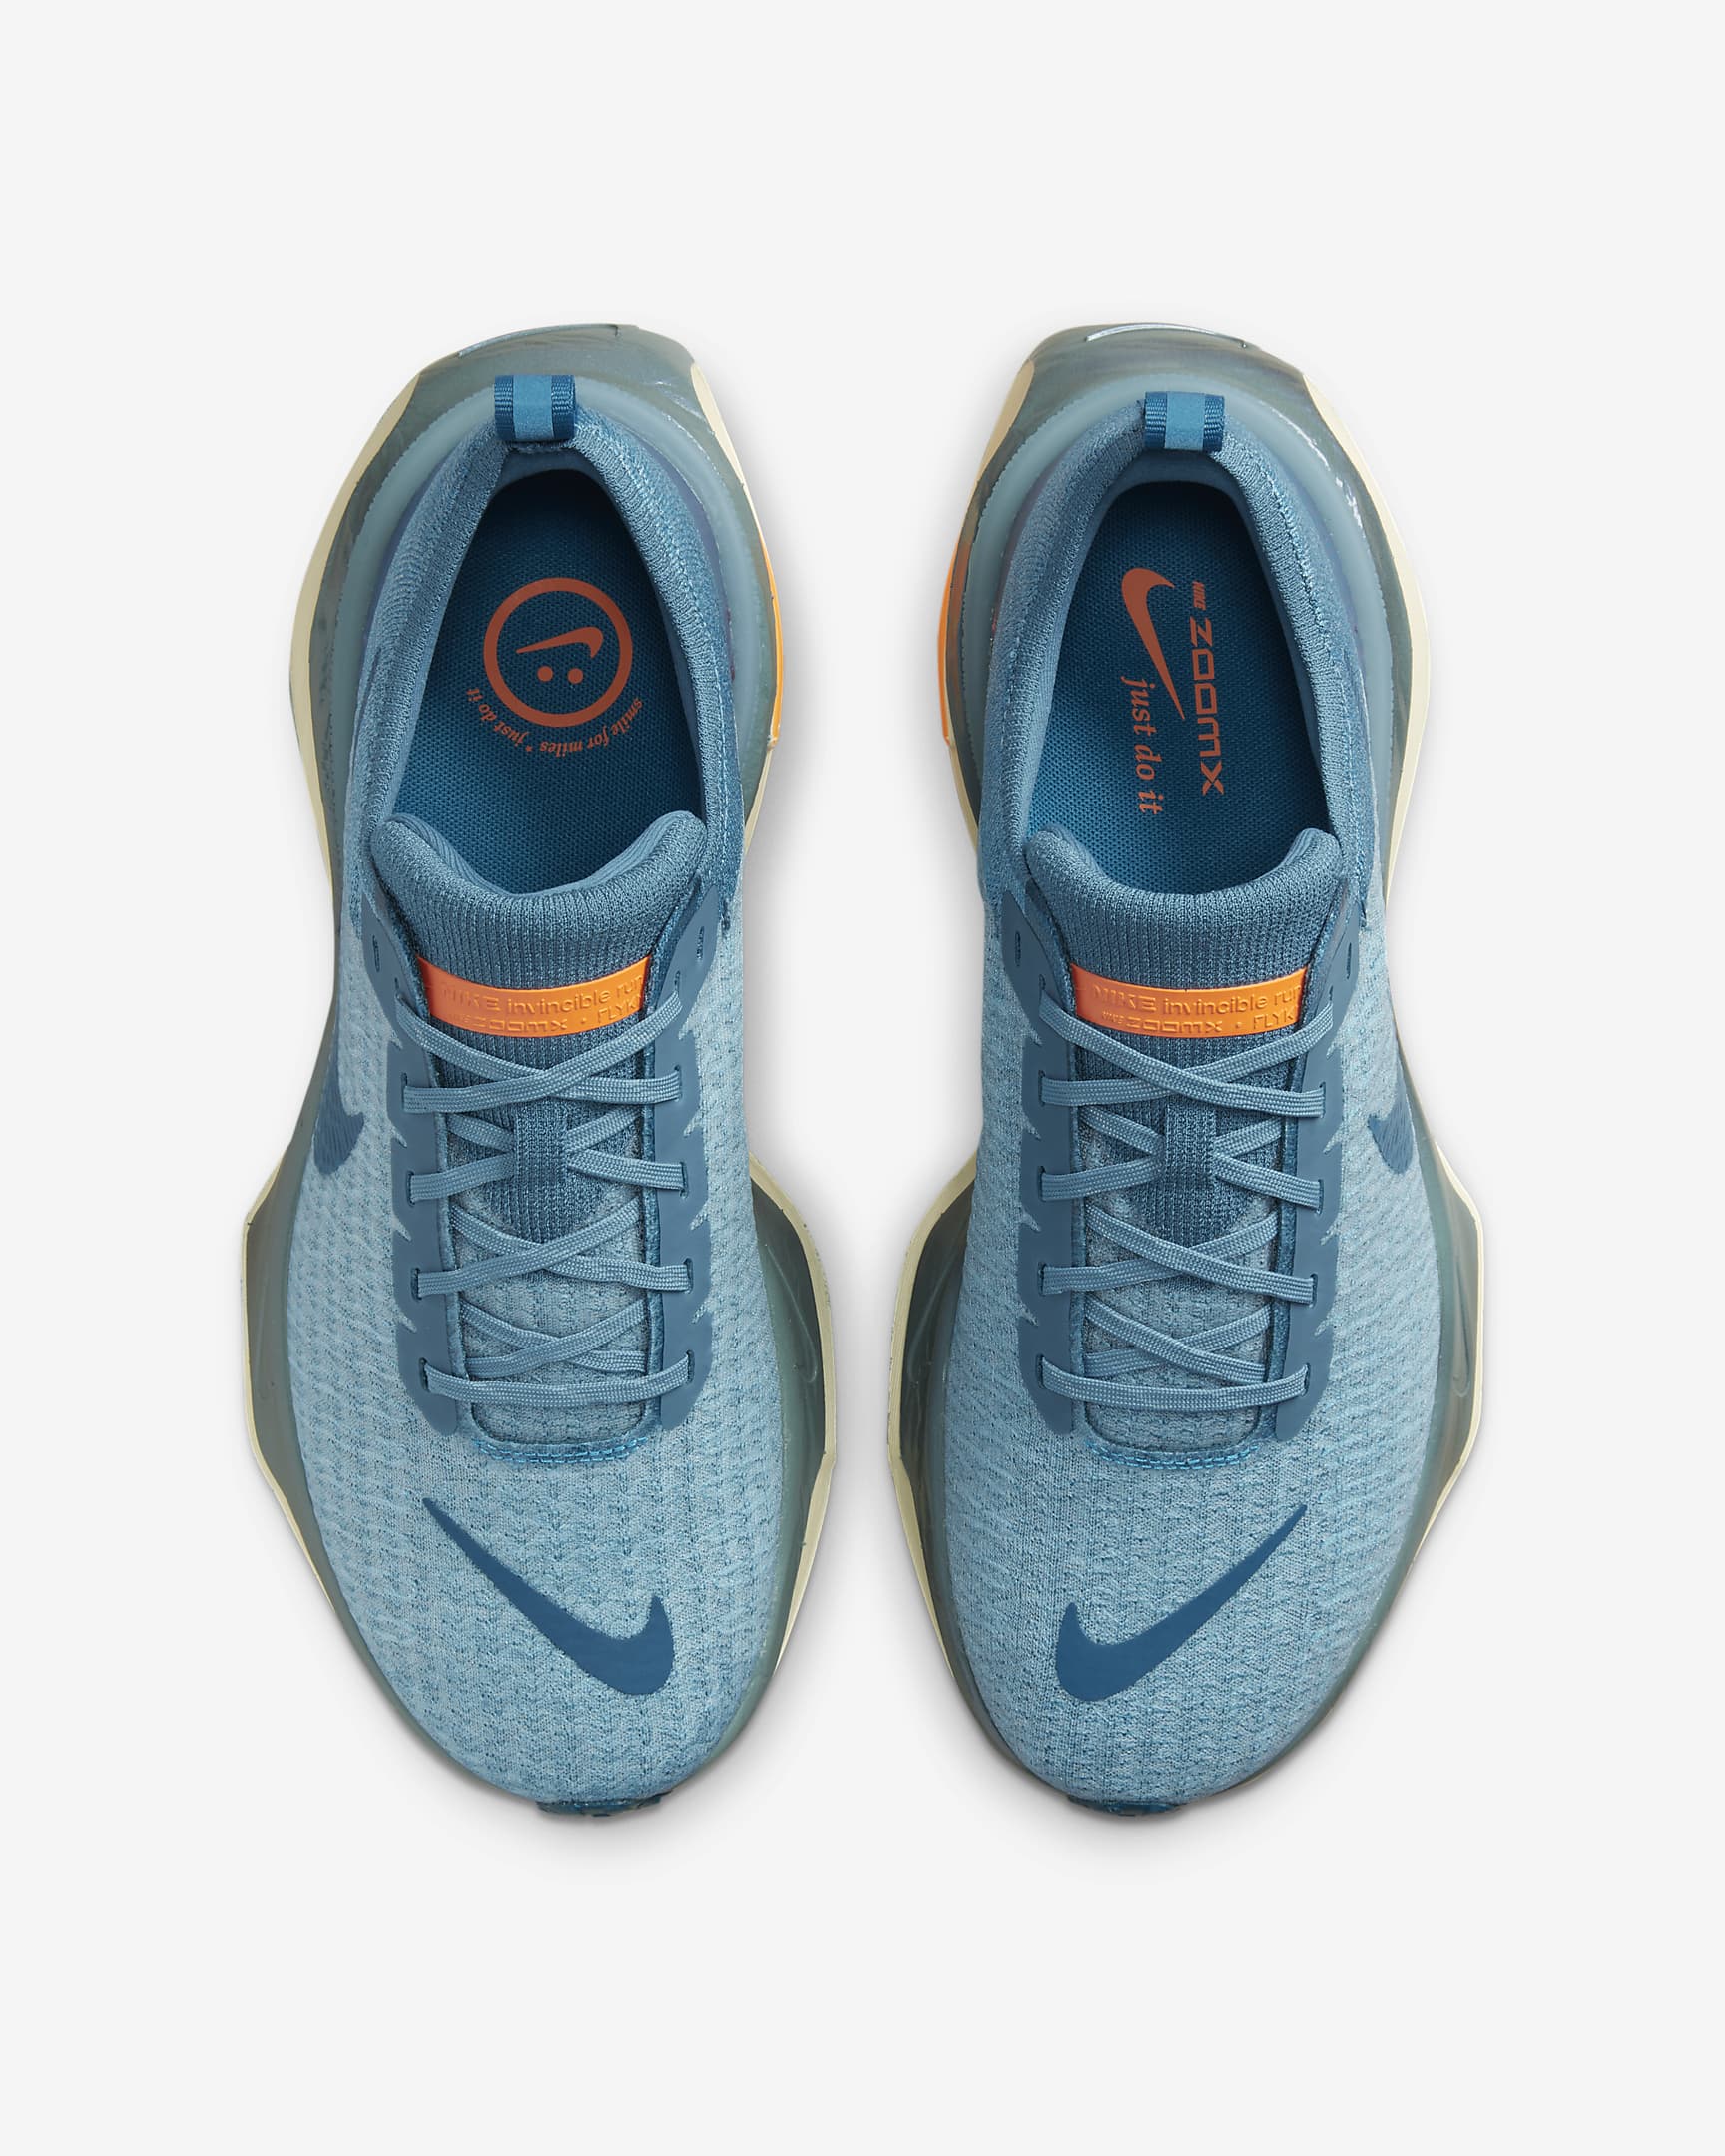 Nike Invincible 3 Review: Is This the Future of Running Footwear? Shocking Results Inside!